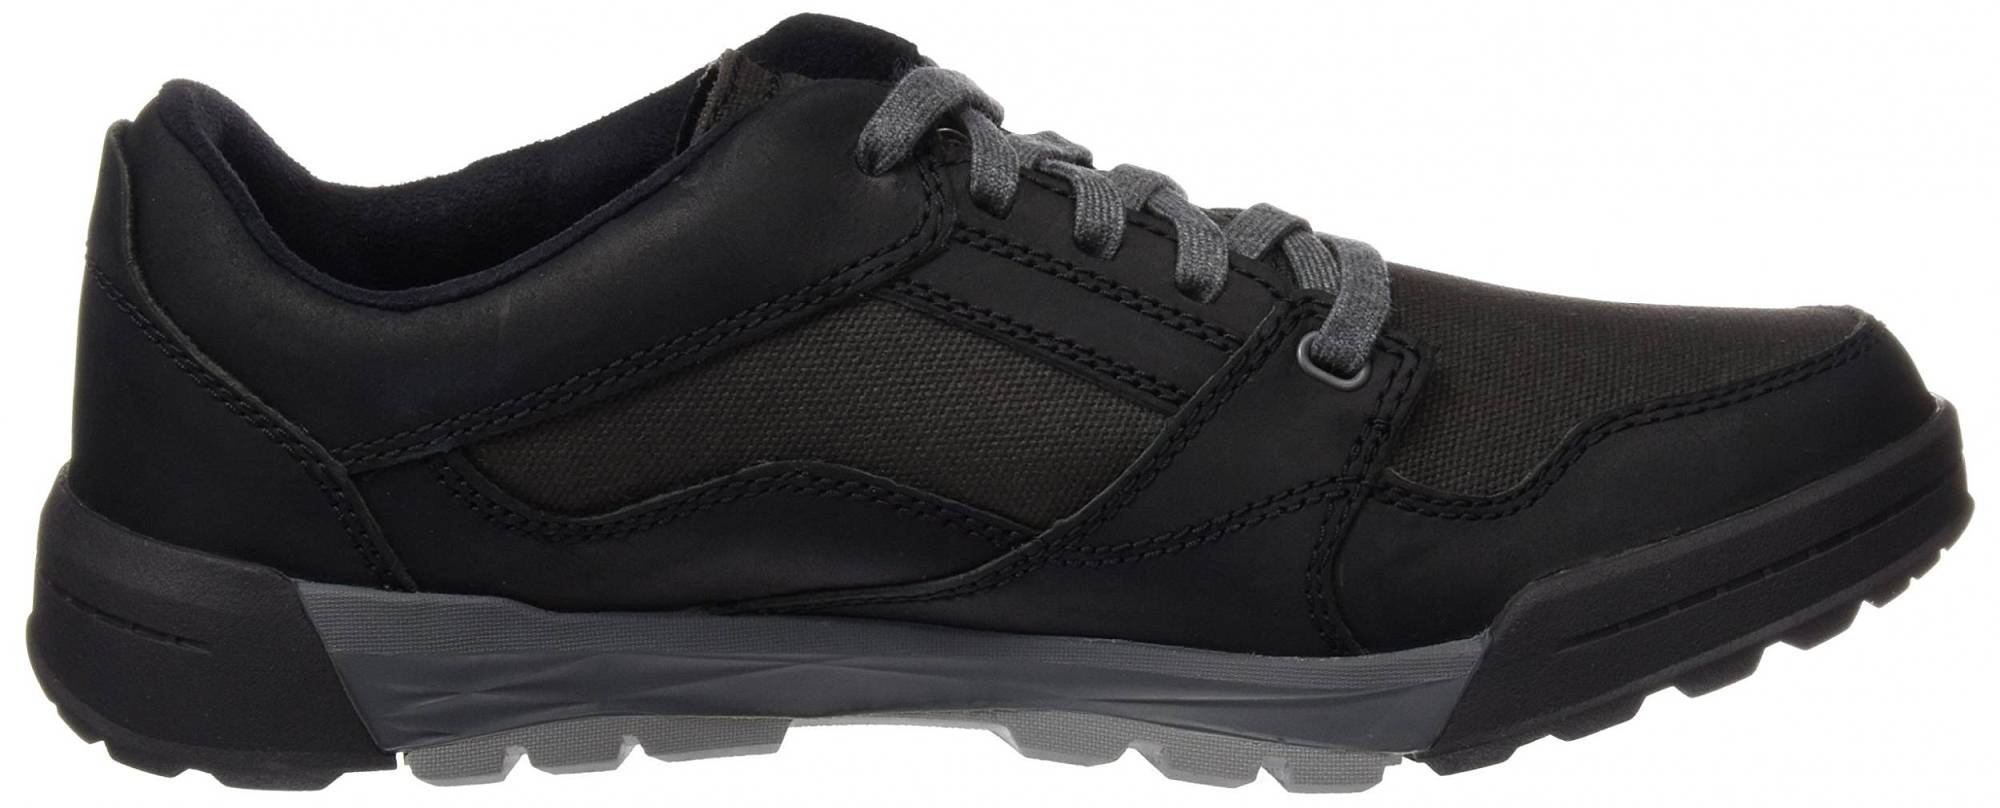 Merrell Berner Shift Lace – Shoes Reviews & Reasons To Buy